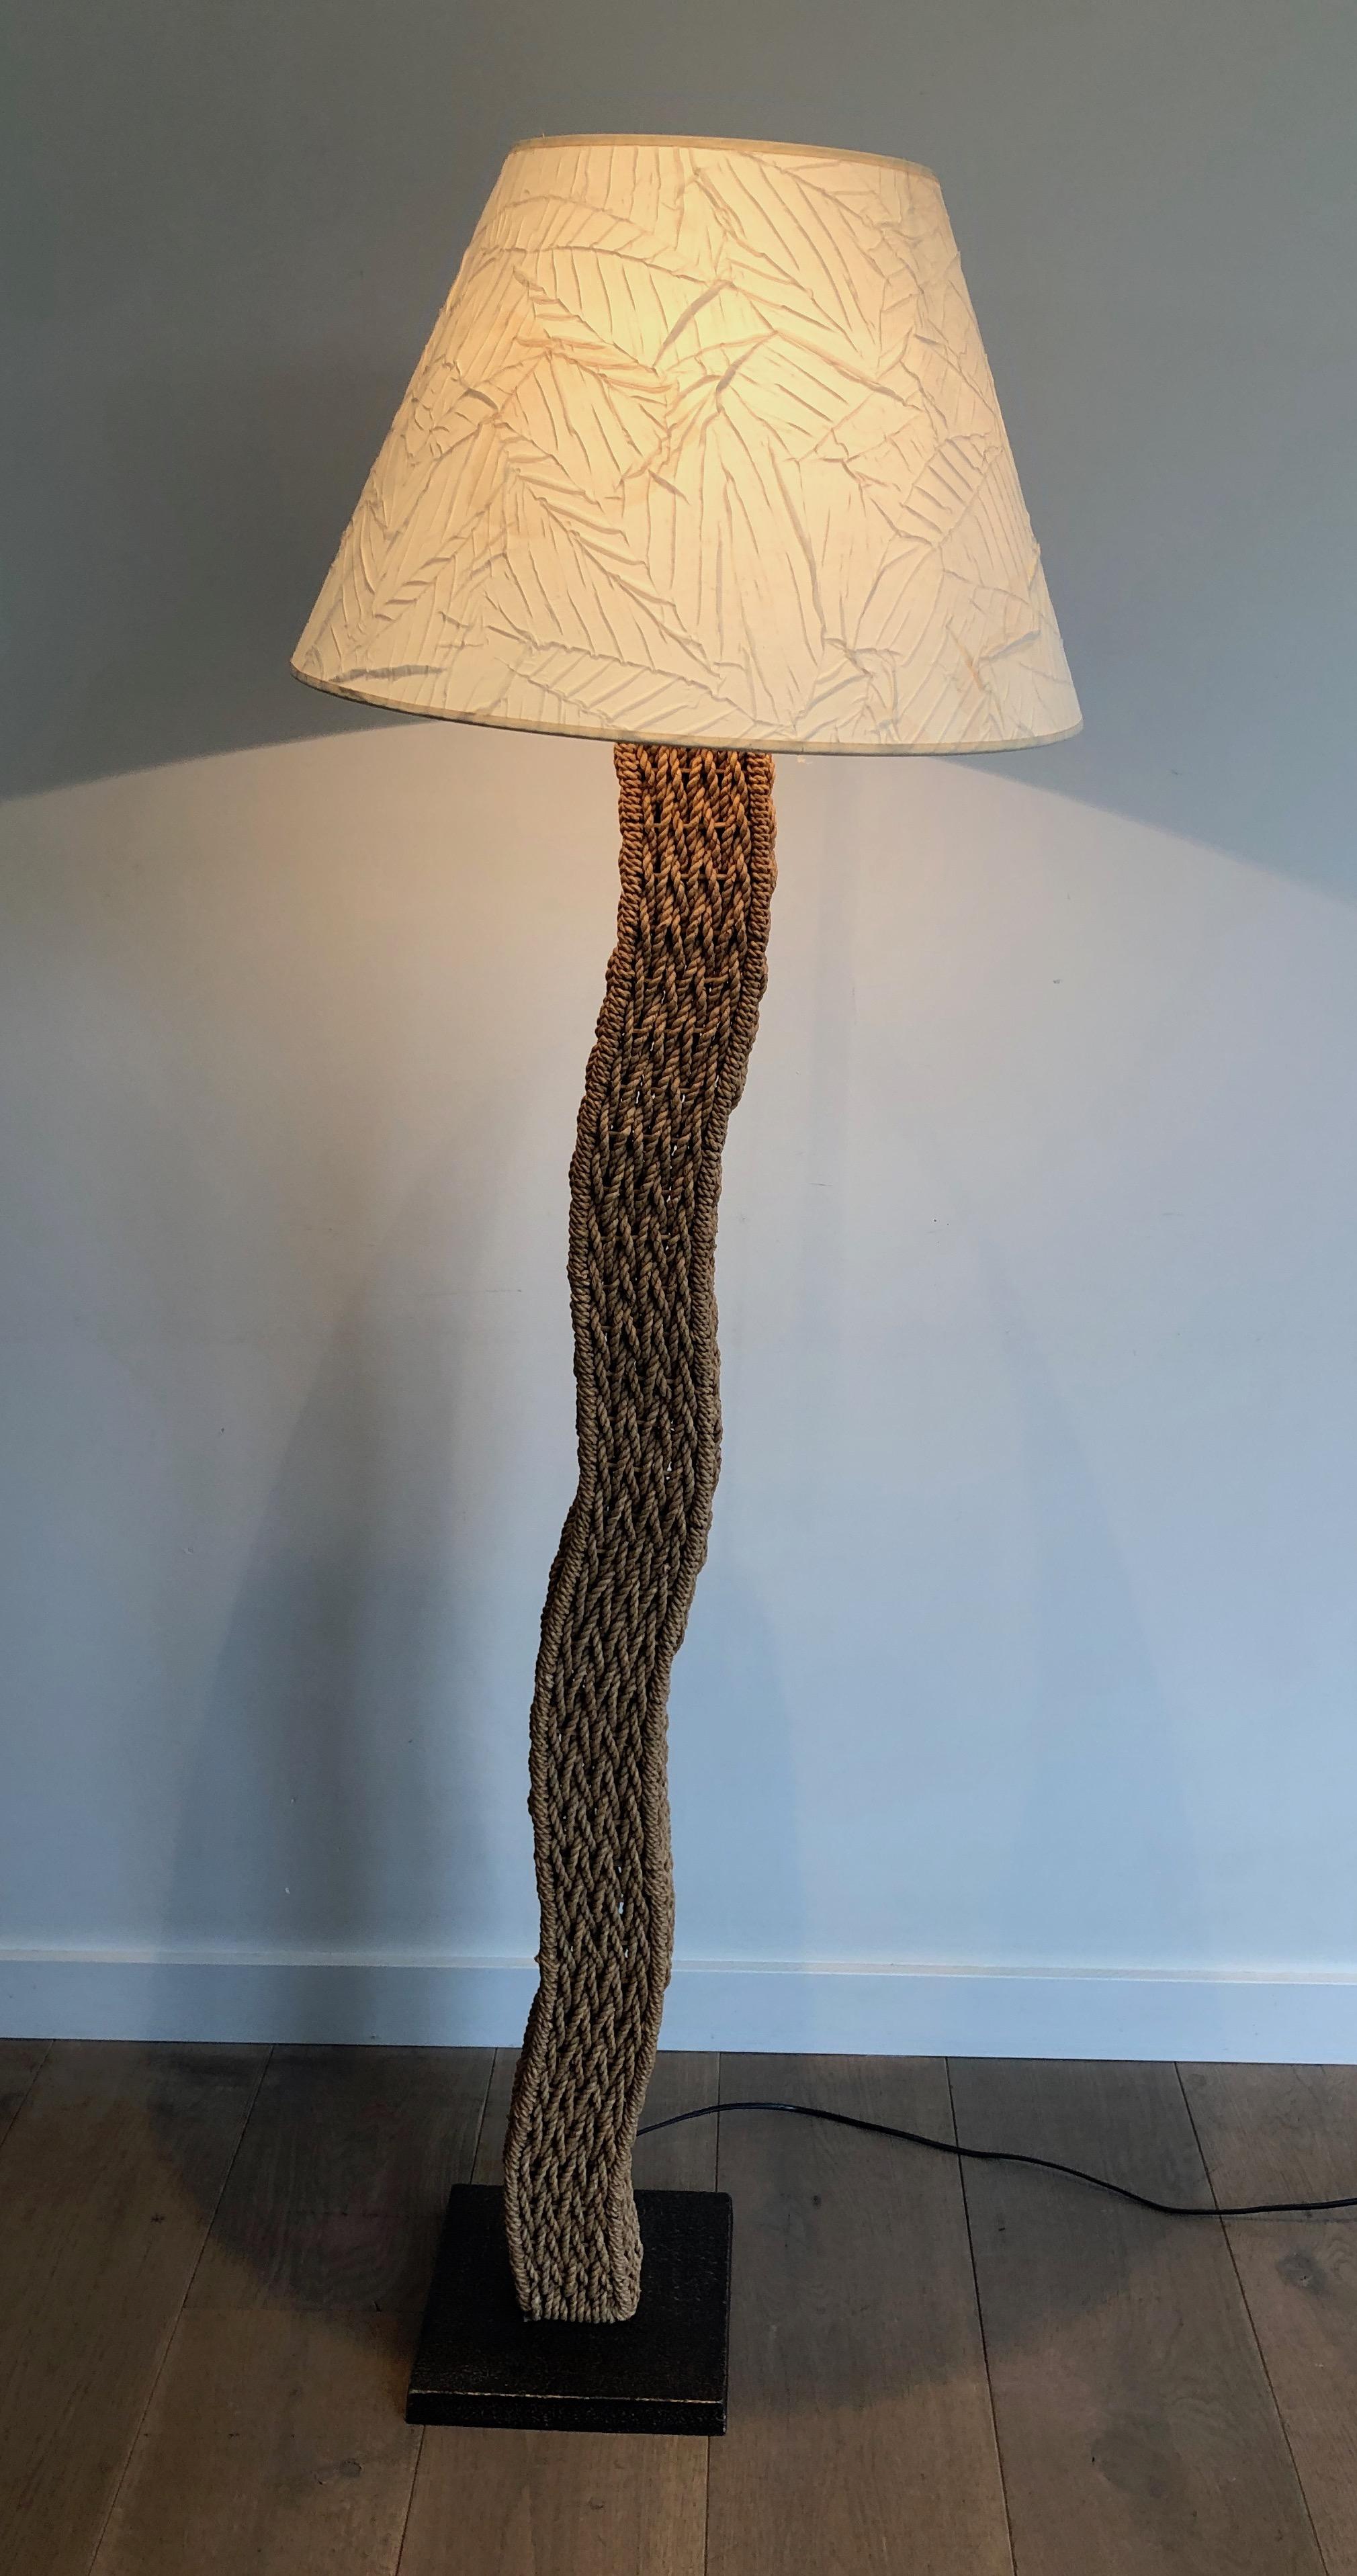 This very nice design floor lamp is made of rope on a square metal base. This is Japanese work by Tarogo, circa 1980.